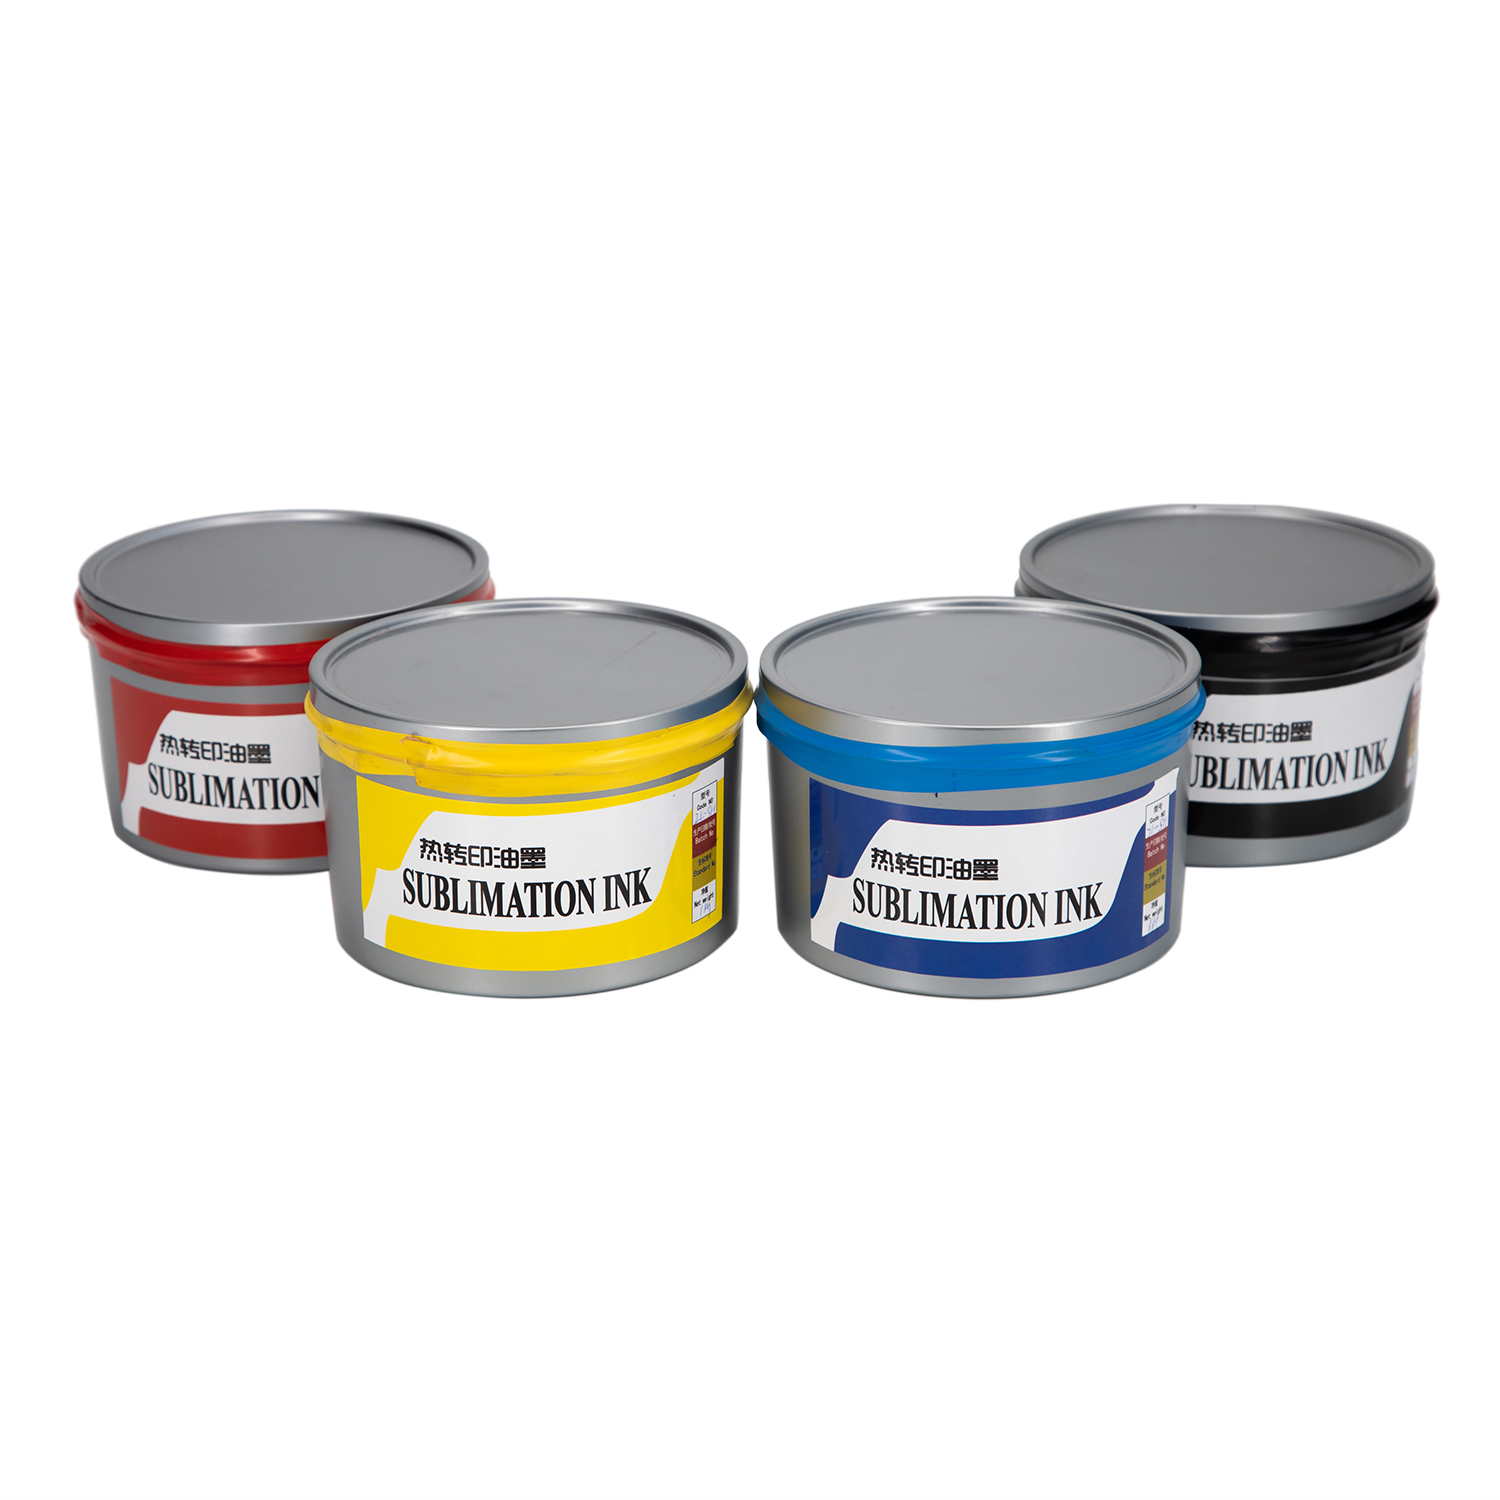 ZLQ brand earth-friendly offset sublimation ink with 4 colors cmyk